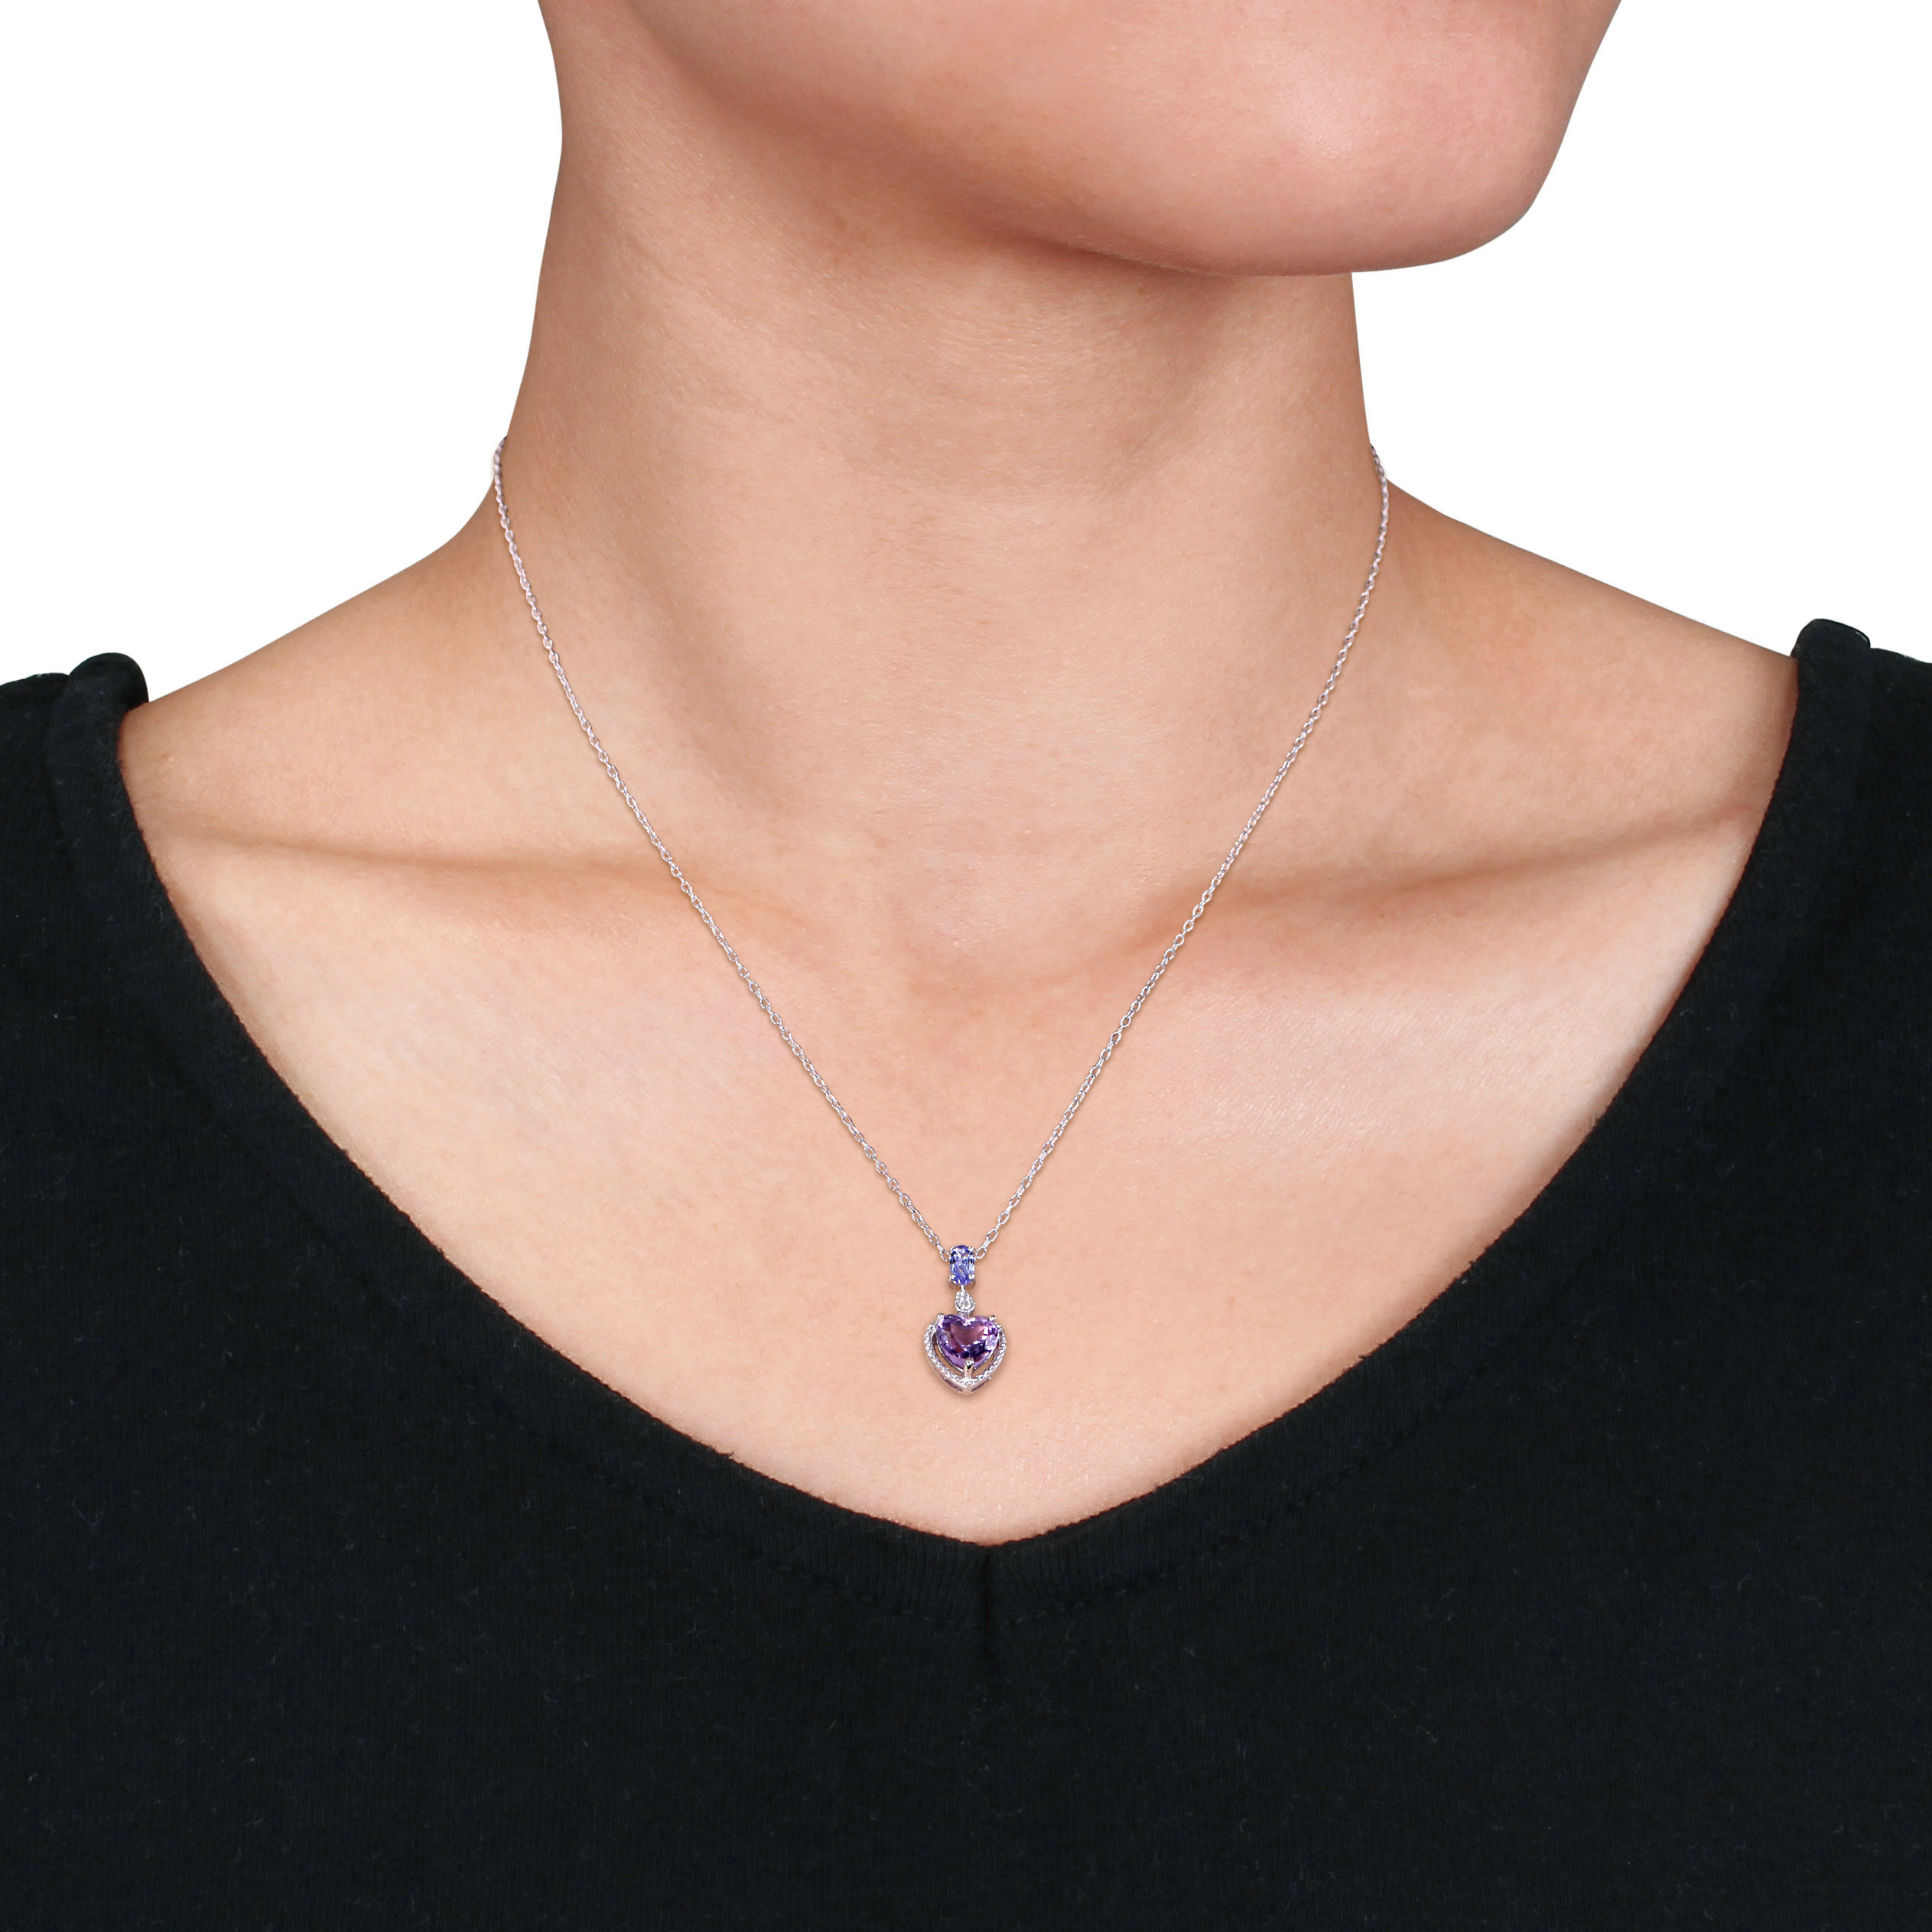 Diamond, Tanzanite, and Heart Shaped Amethyst Pendant with Chain in Sterling Silver